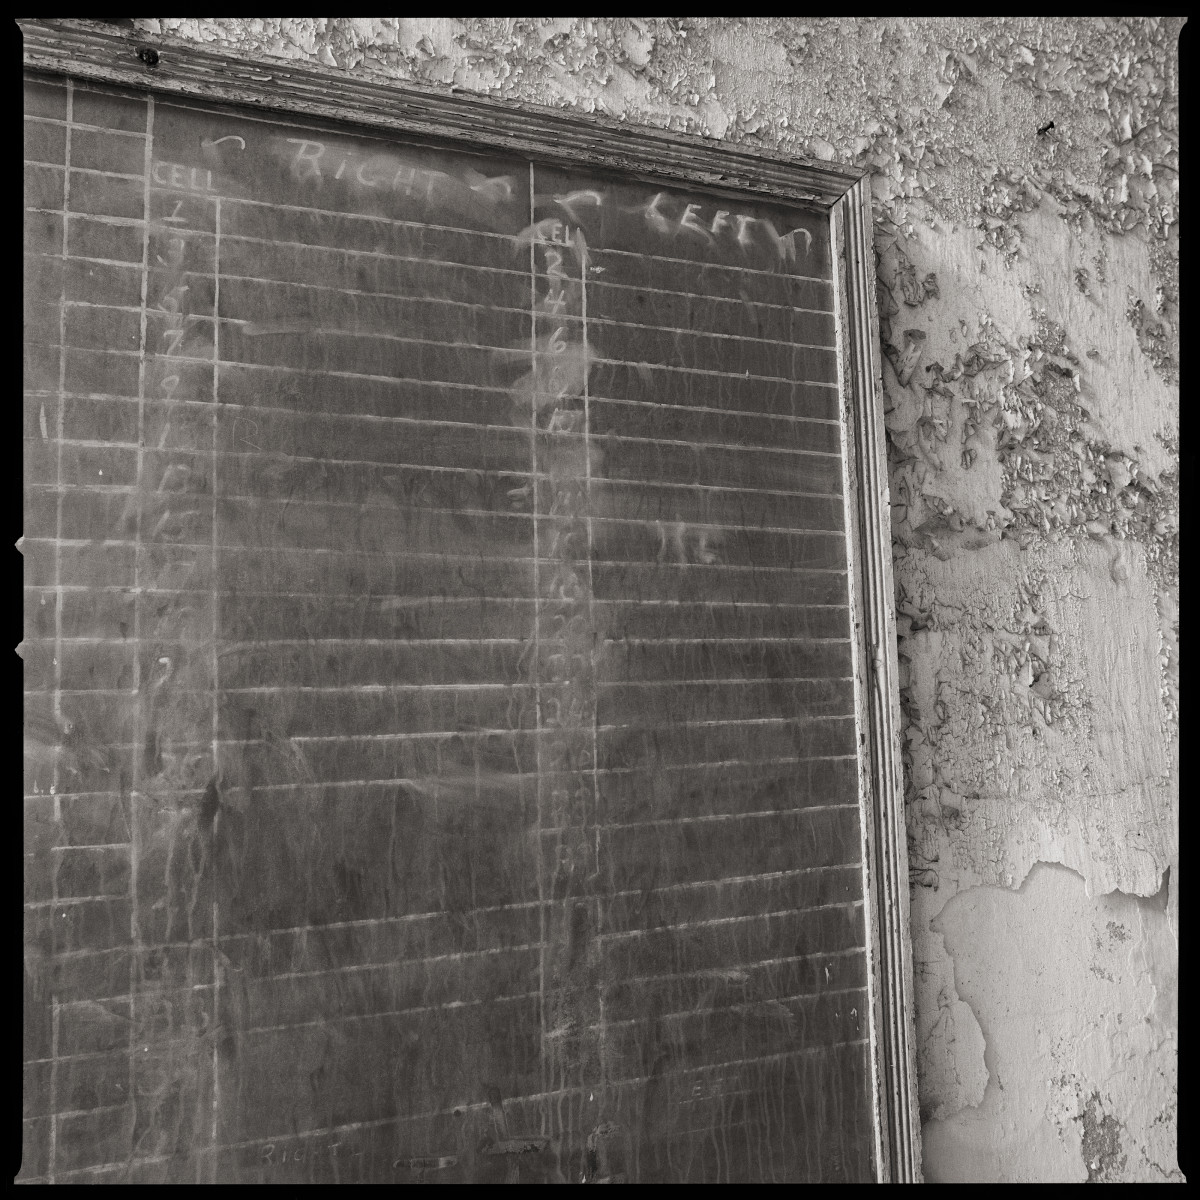 Prisoner Control Board by Eric T. Kunsman  Image: ID: A black and white image shows a chalkboard that is numbered, mounted on a wall with chipped paint,